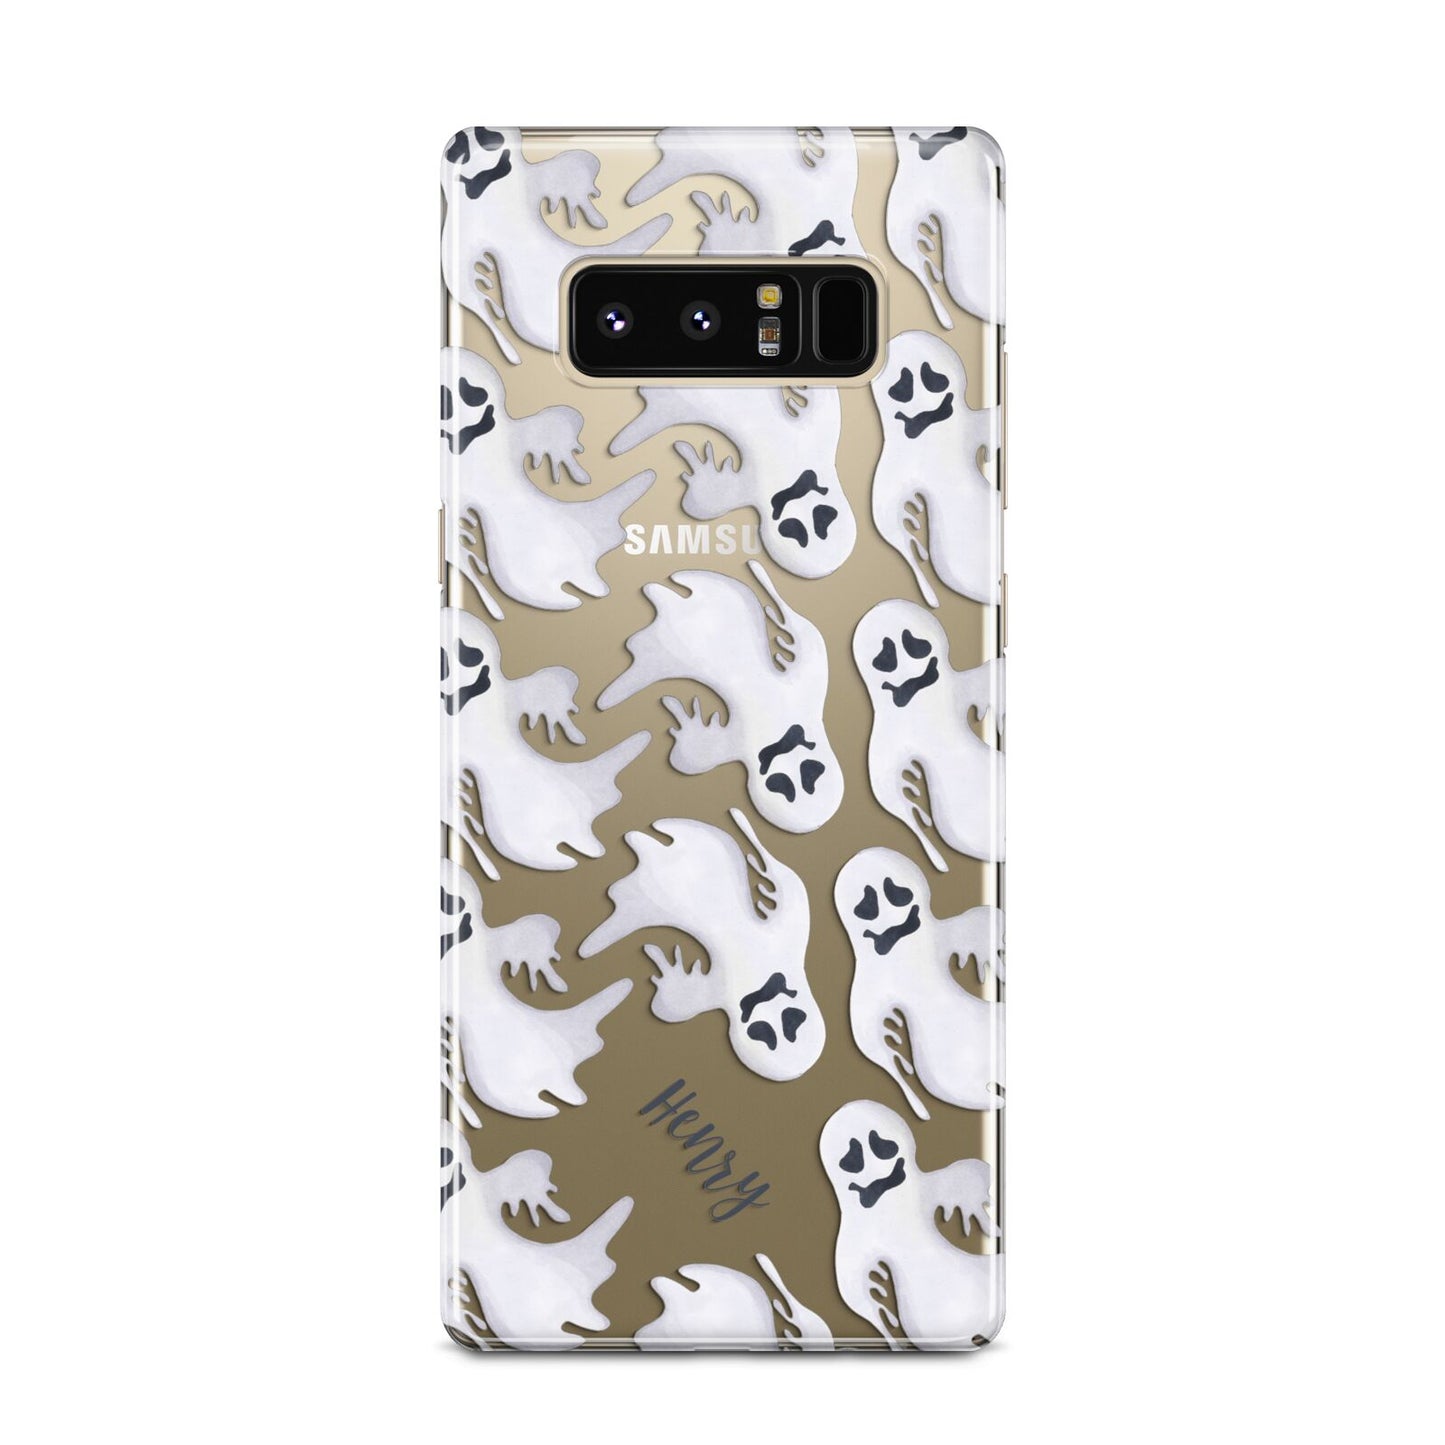 Floaty Ghosts Personalised Samsung Galaxy Note 8 Case